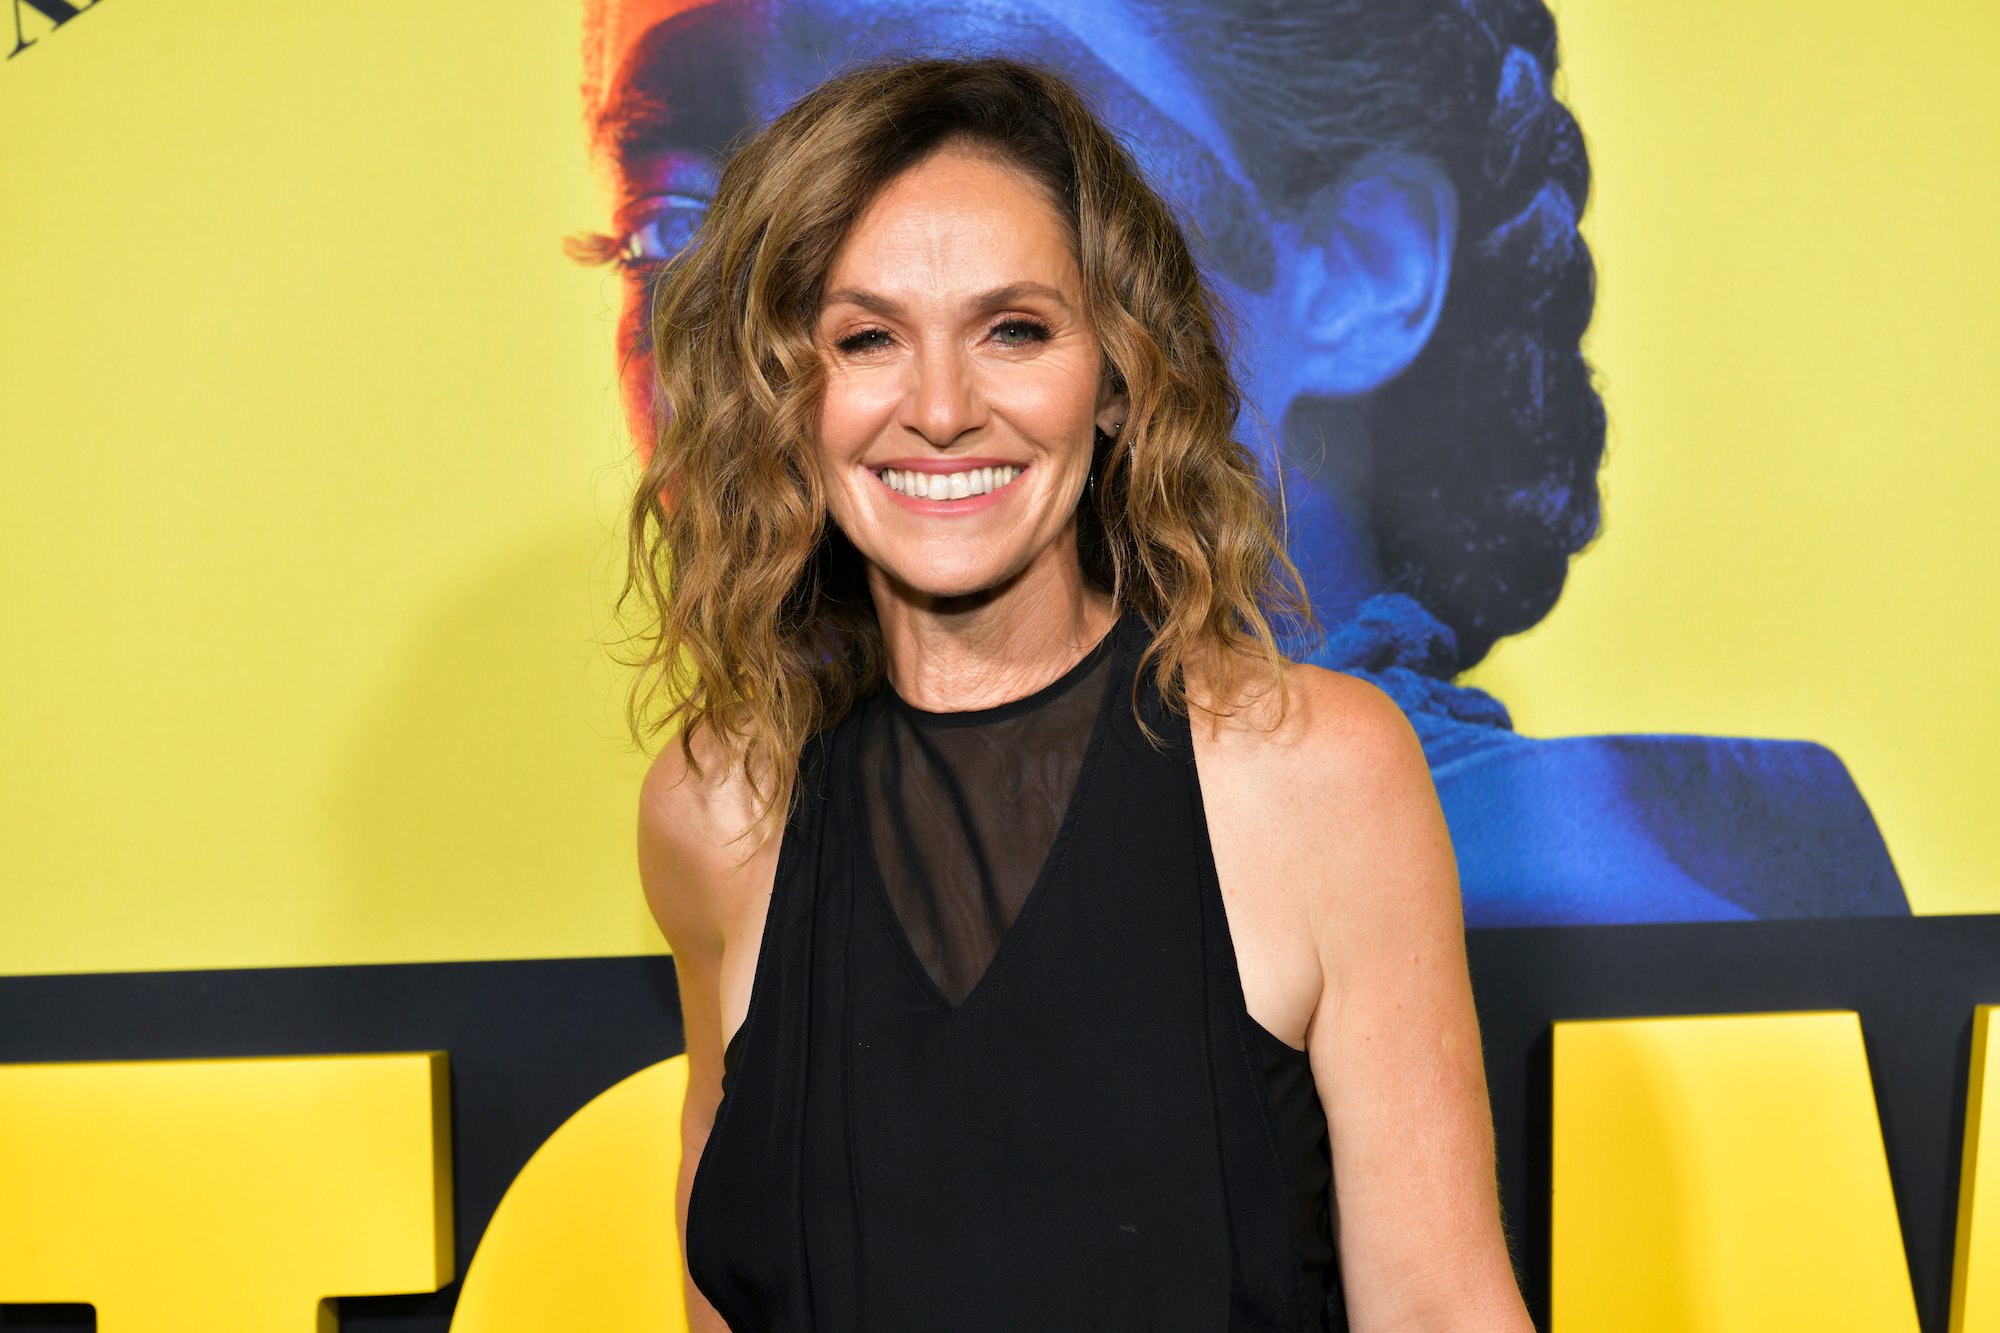 ‘NYPD Blue’: Amy Brenneman Felt ‘Honored’ to Star In the Groundbreaking Nude Scenes